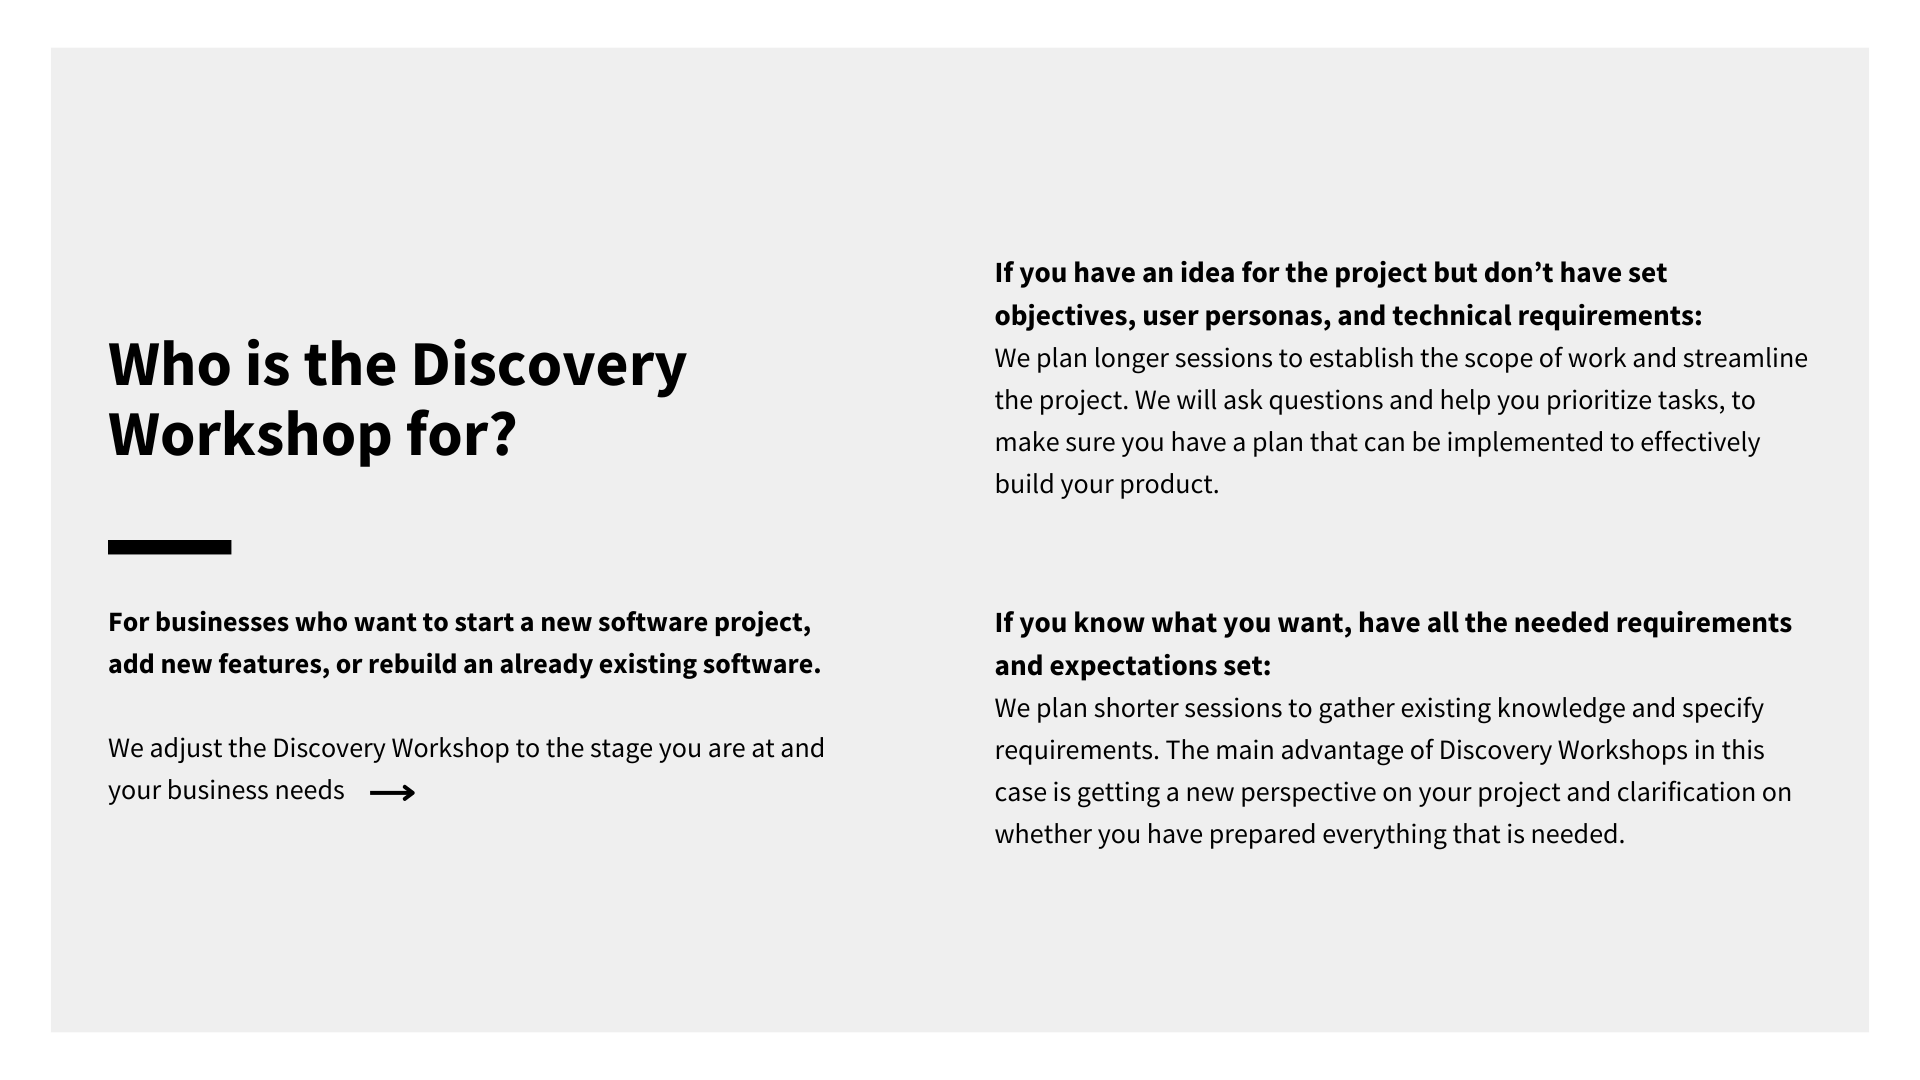 Who is the discovery workshop for?